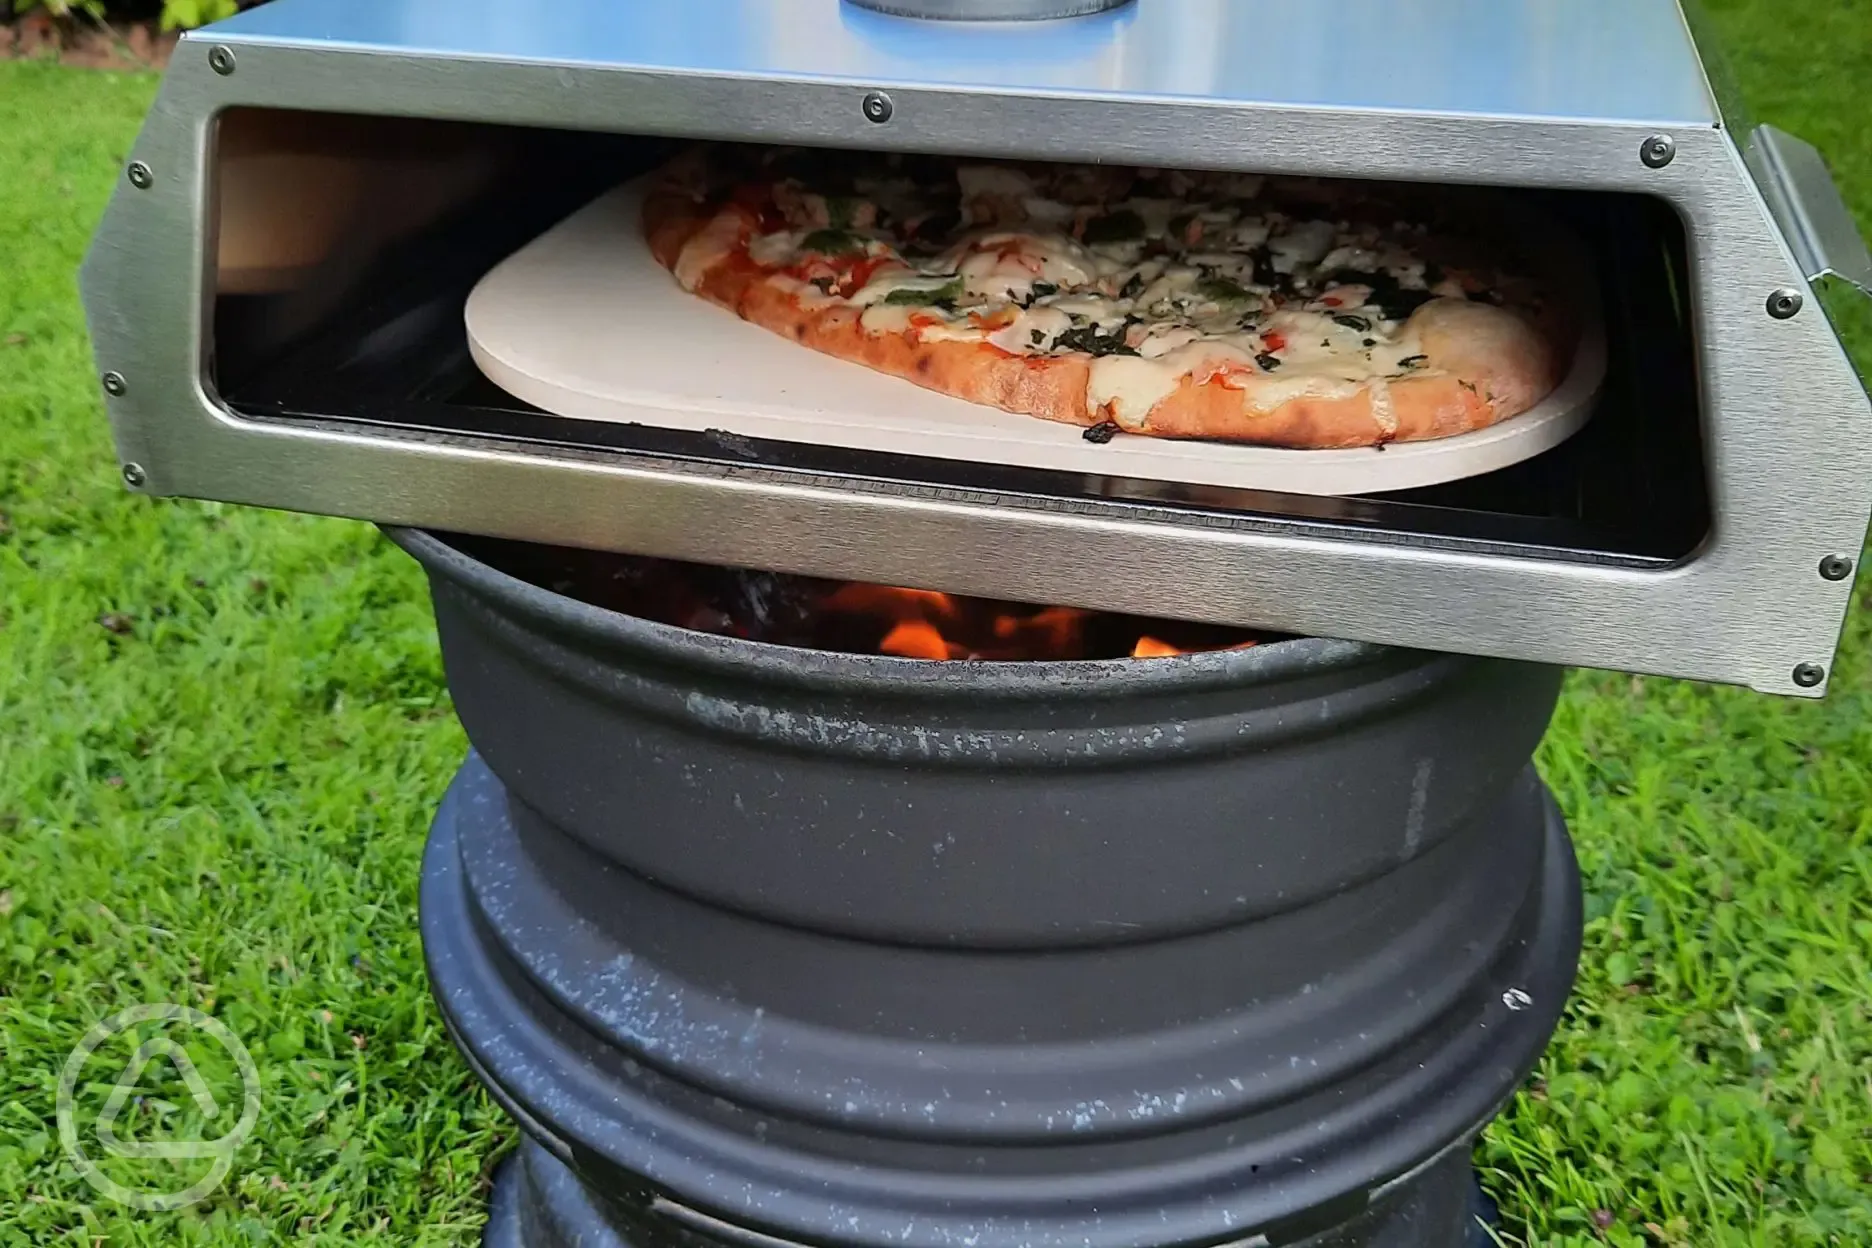 Pizza oven over the fire pit